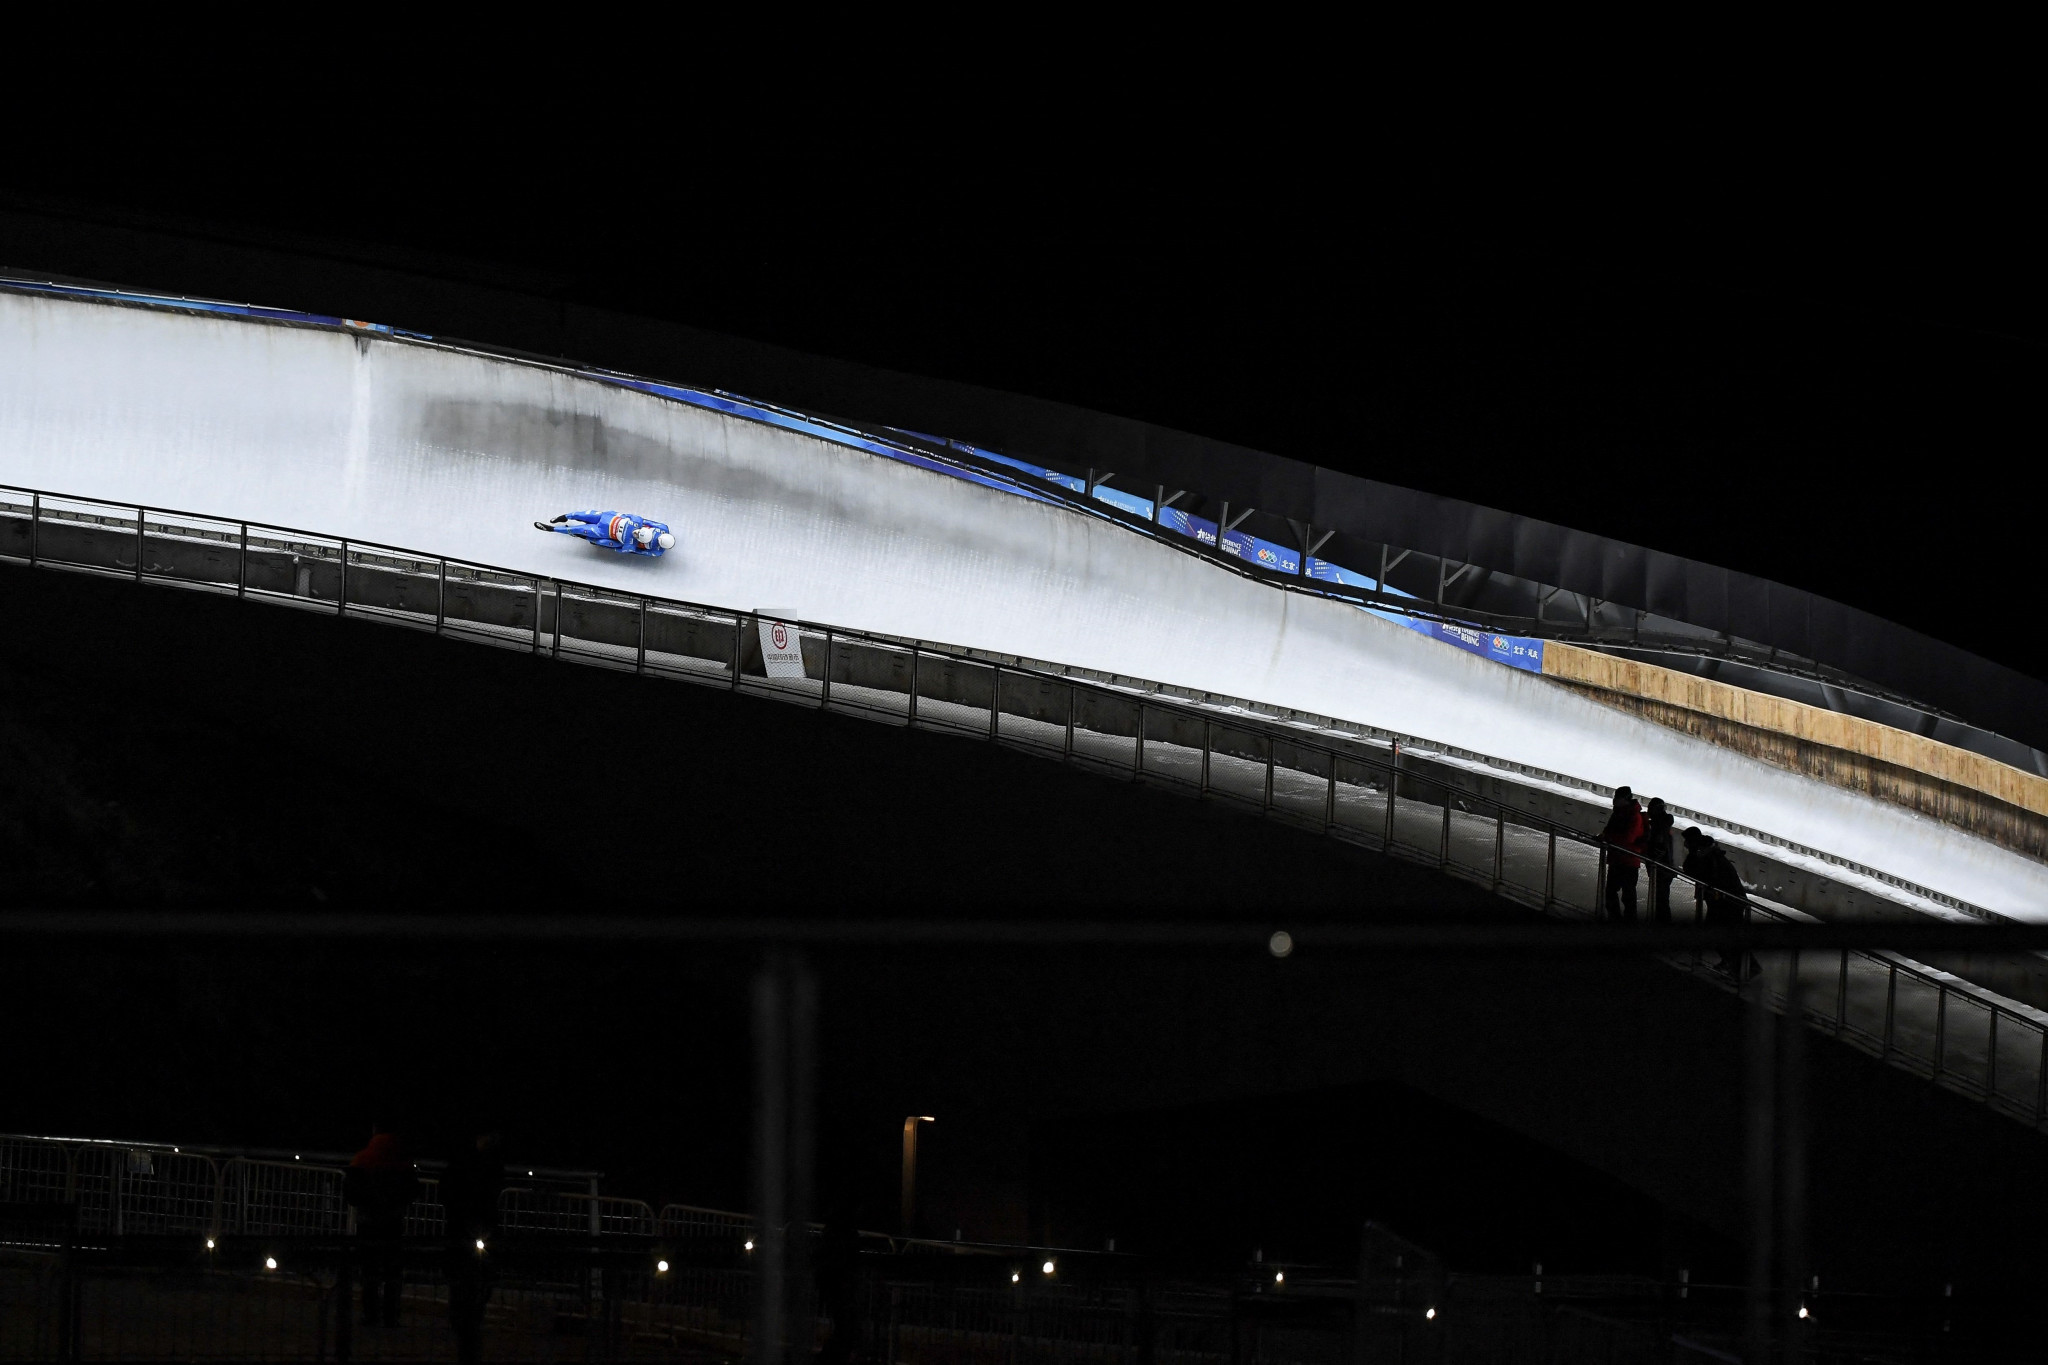 Built for Beijing 2022, Yanqing National Sliding Centre held bobsleigh, skeleton and luge events at Winter Olympics ©Getty Images